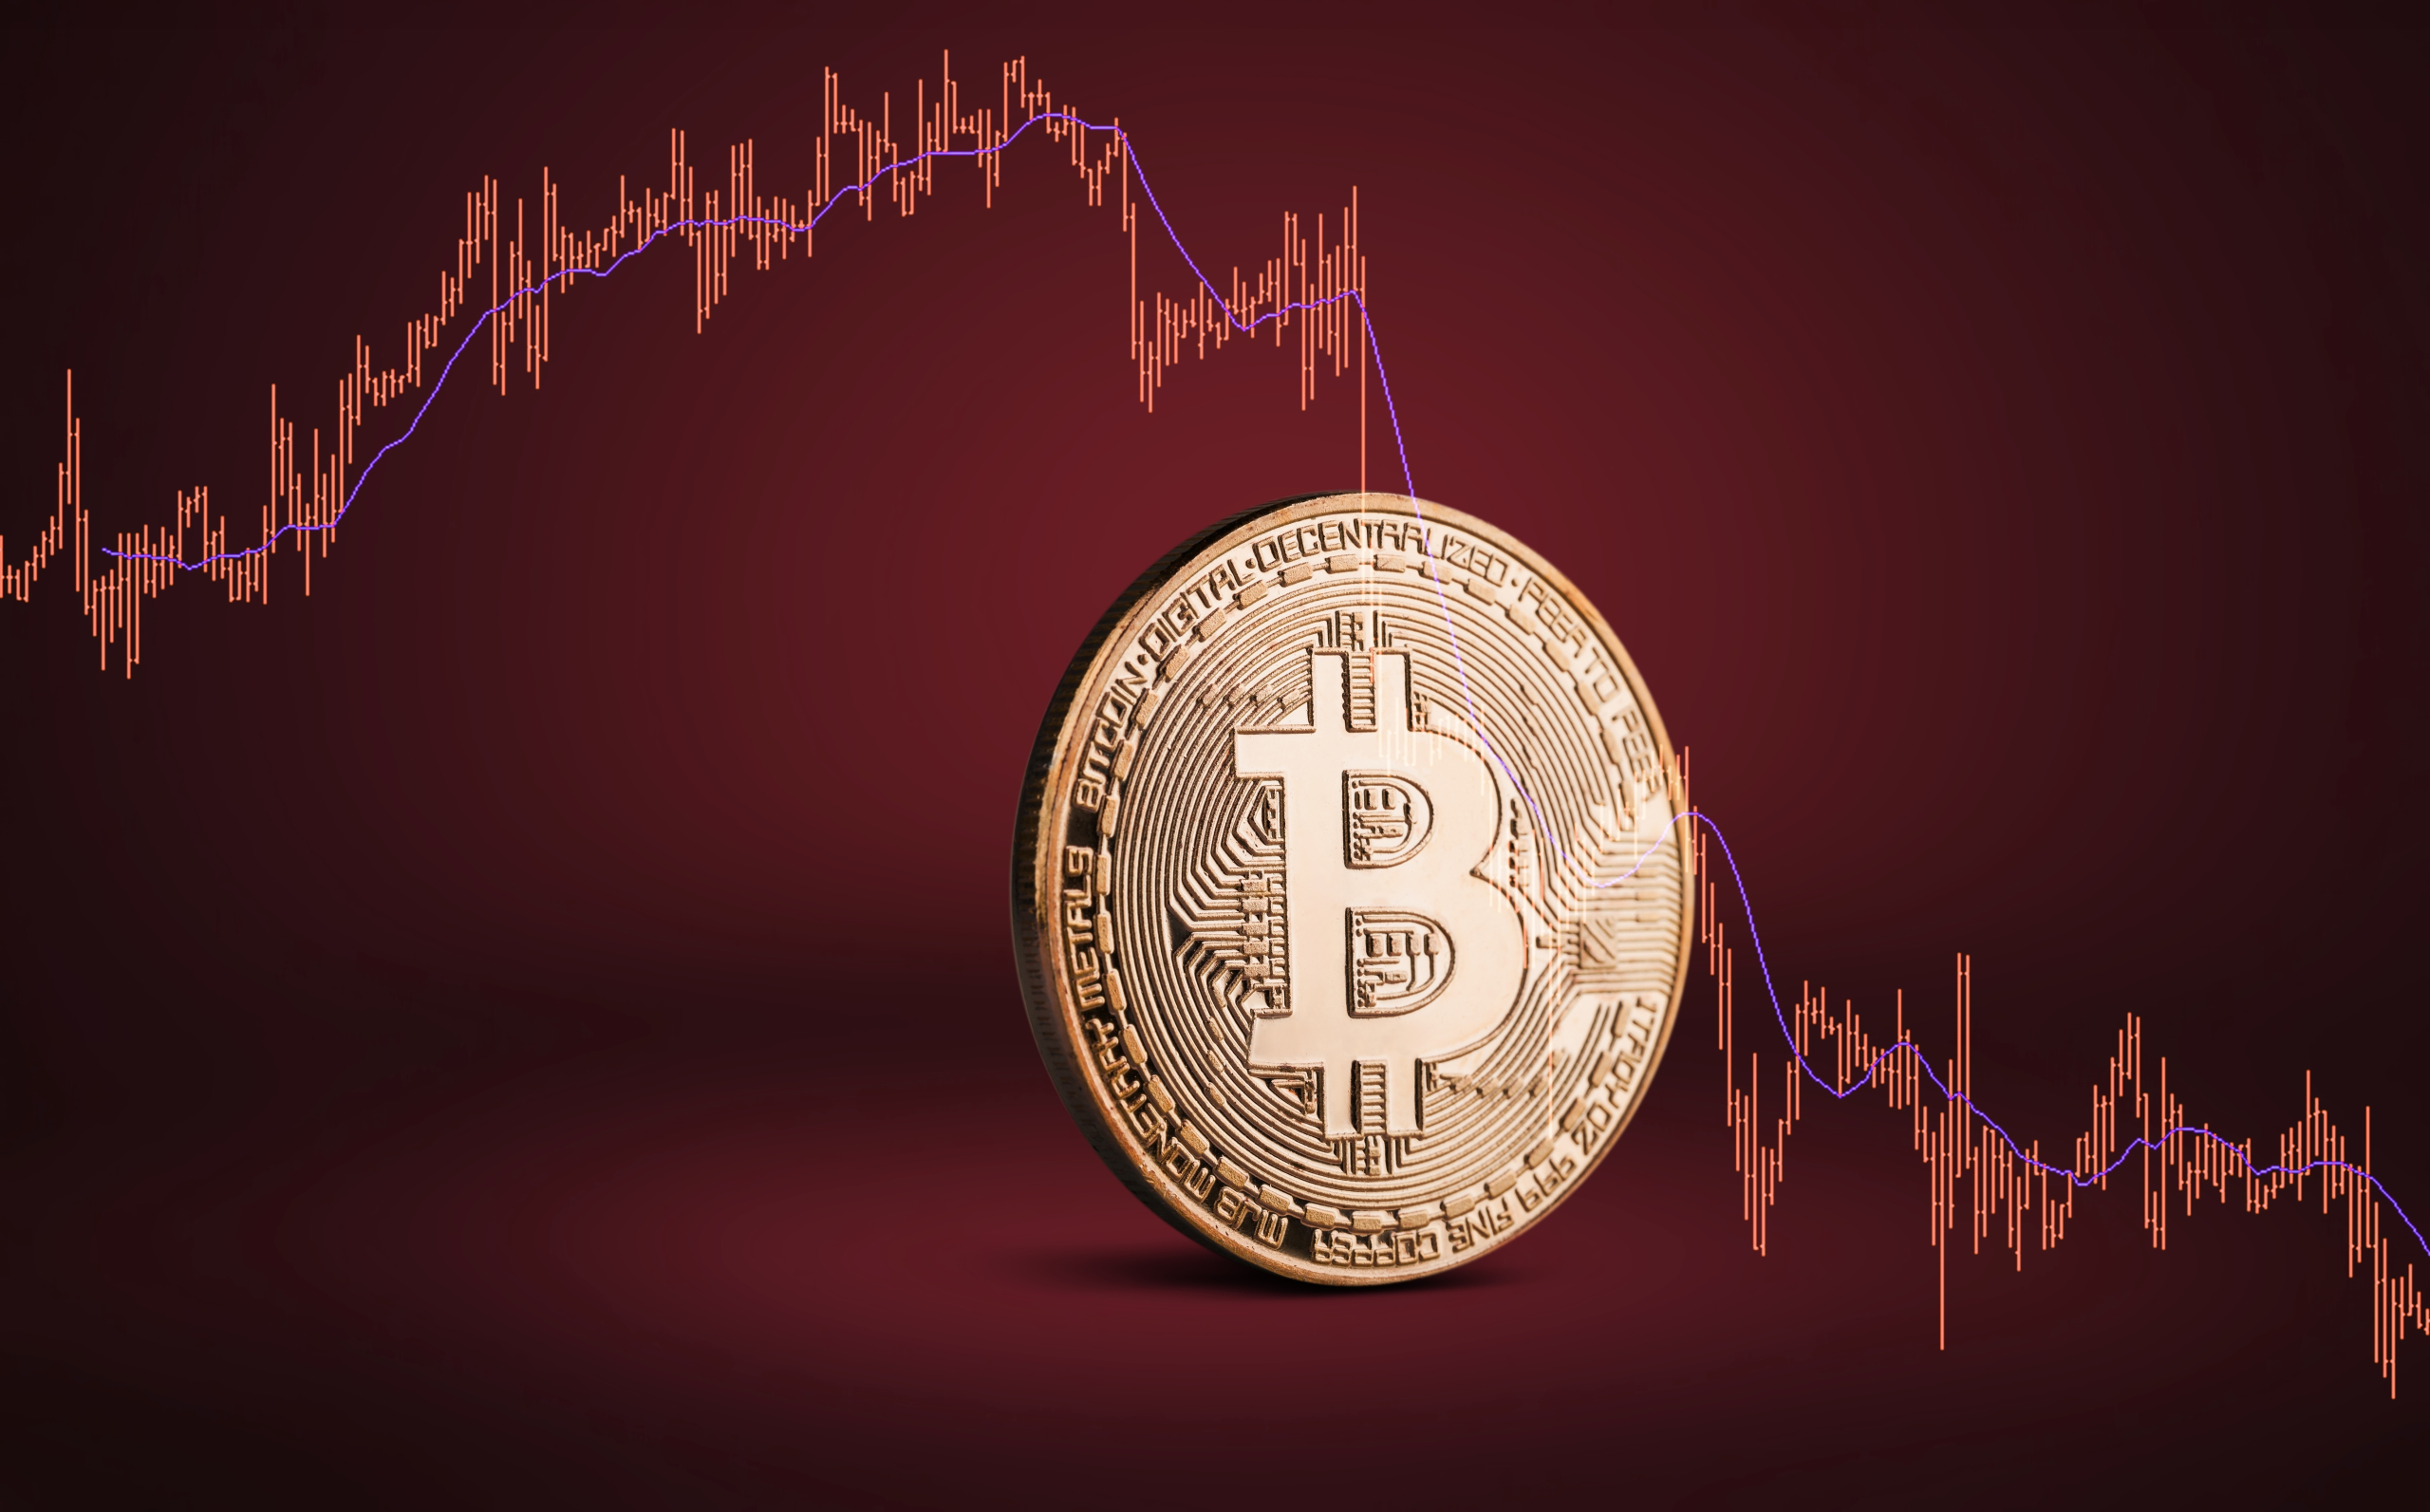 Bitcoin takes a small hit, but remains fairly stable
